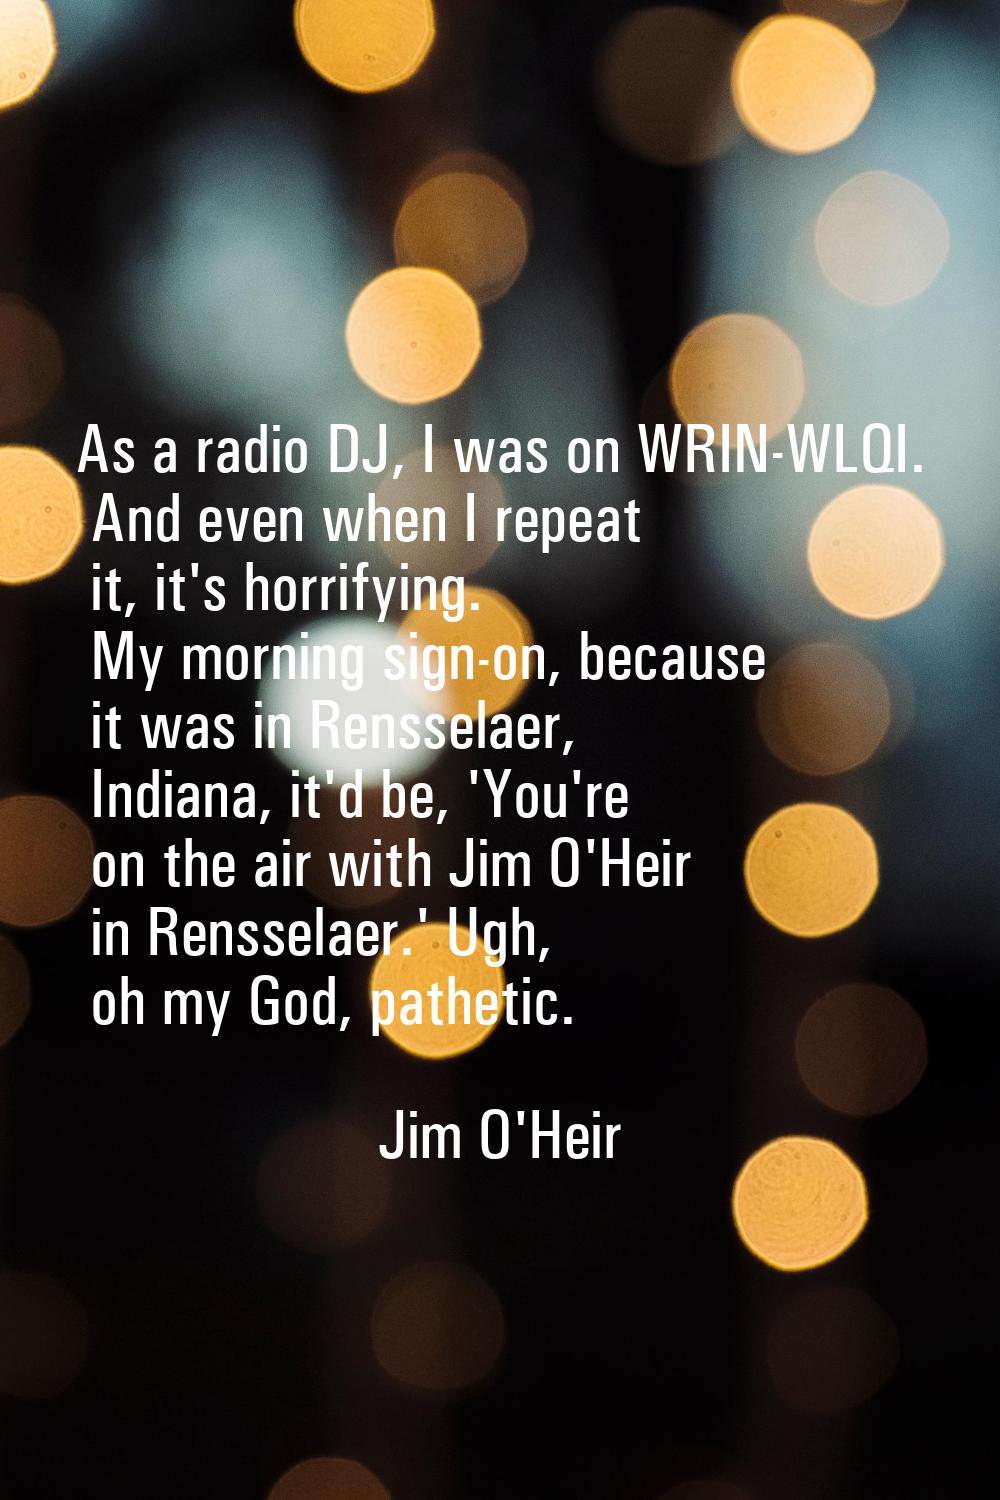 As a radio DJ, I was on WRIN-WLQI. And even when I repeat it, it's horrifying. My morning sign-on, 